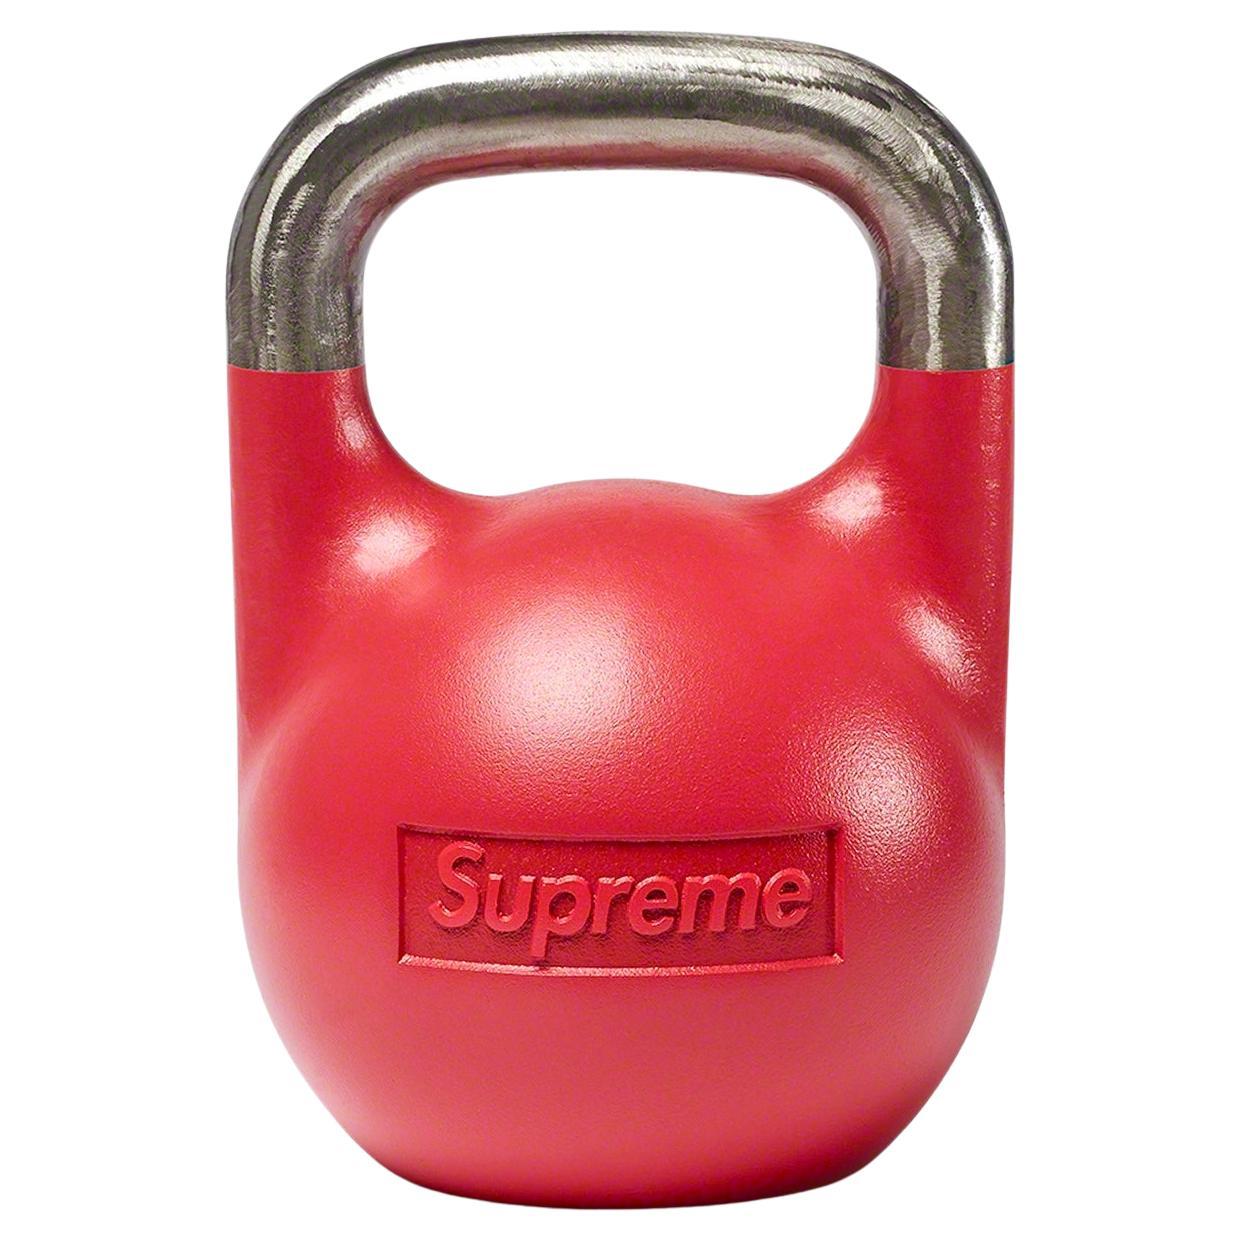 Supreme x Tru Grit Red Kettlebell Six KG Weight, New in Box, Fall 2022 For Sale